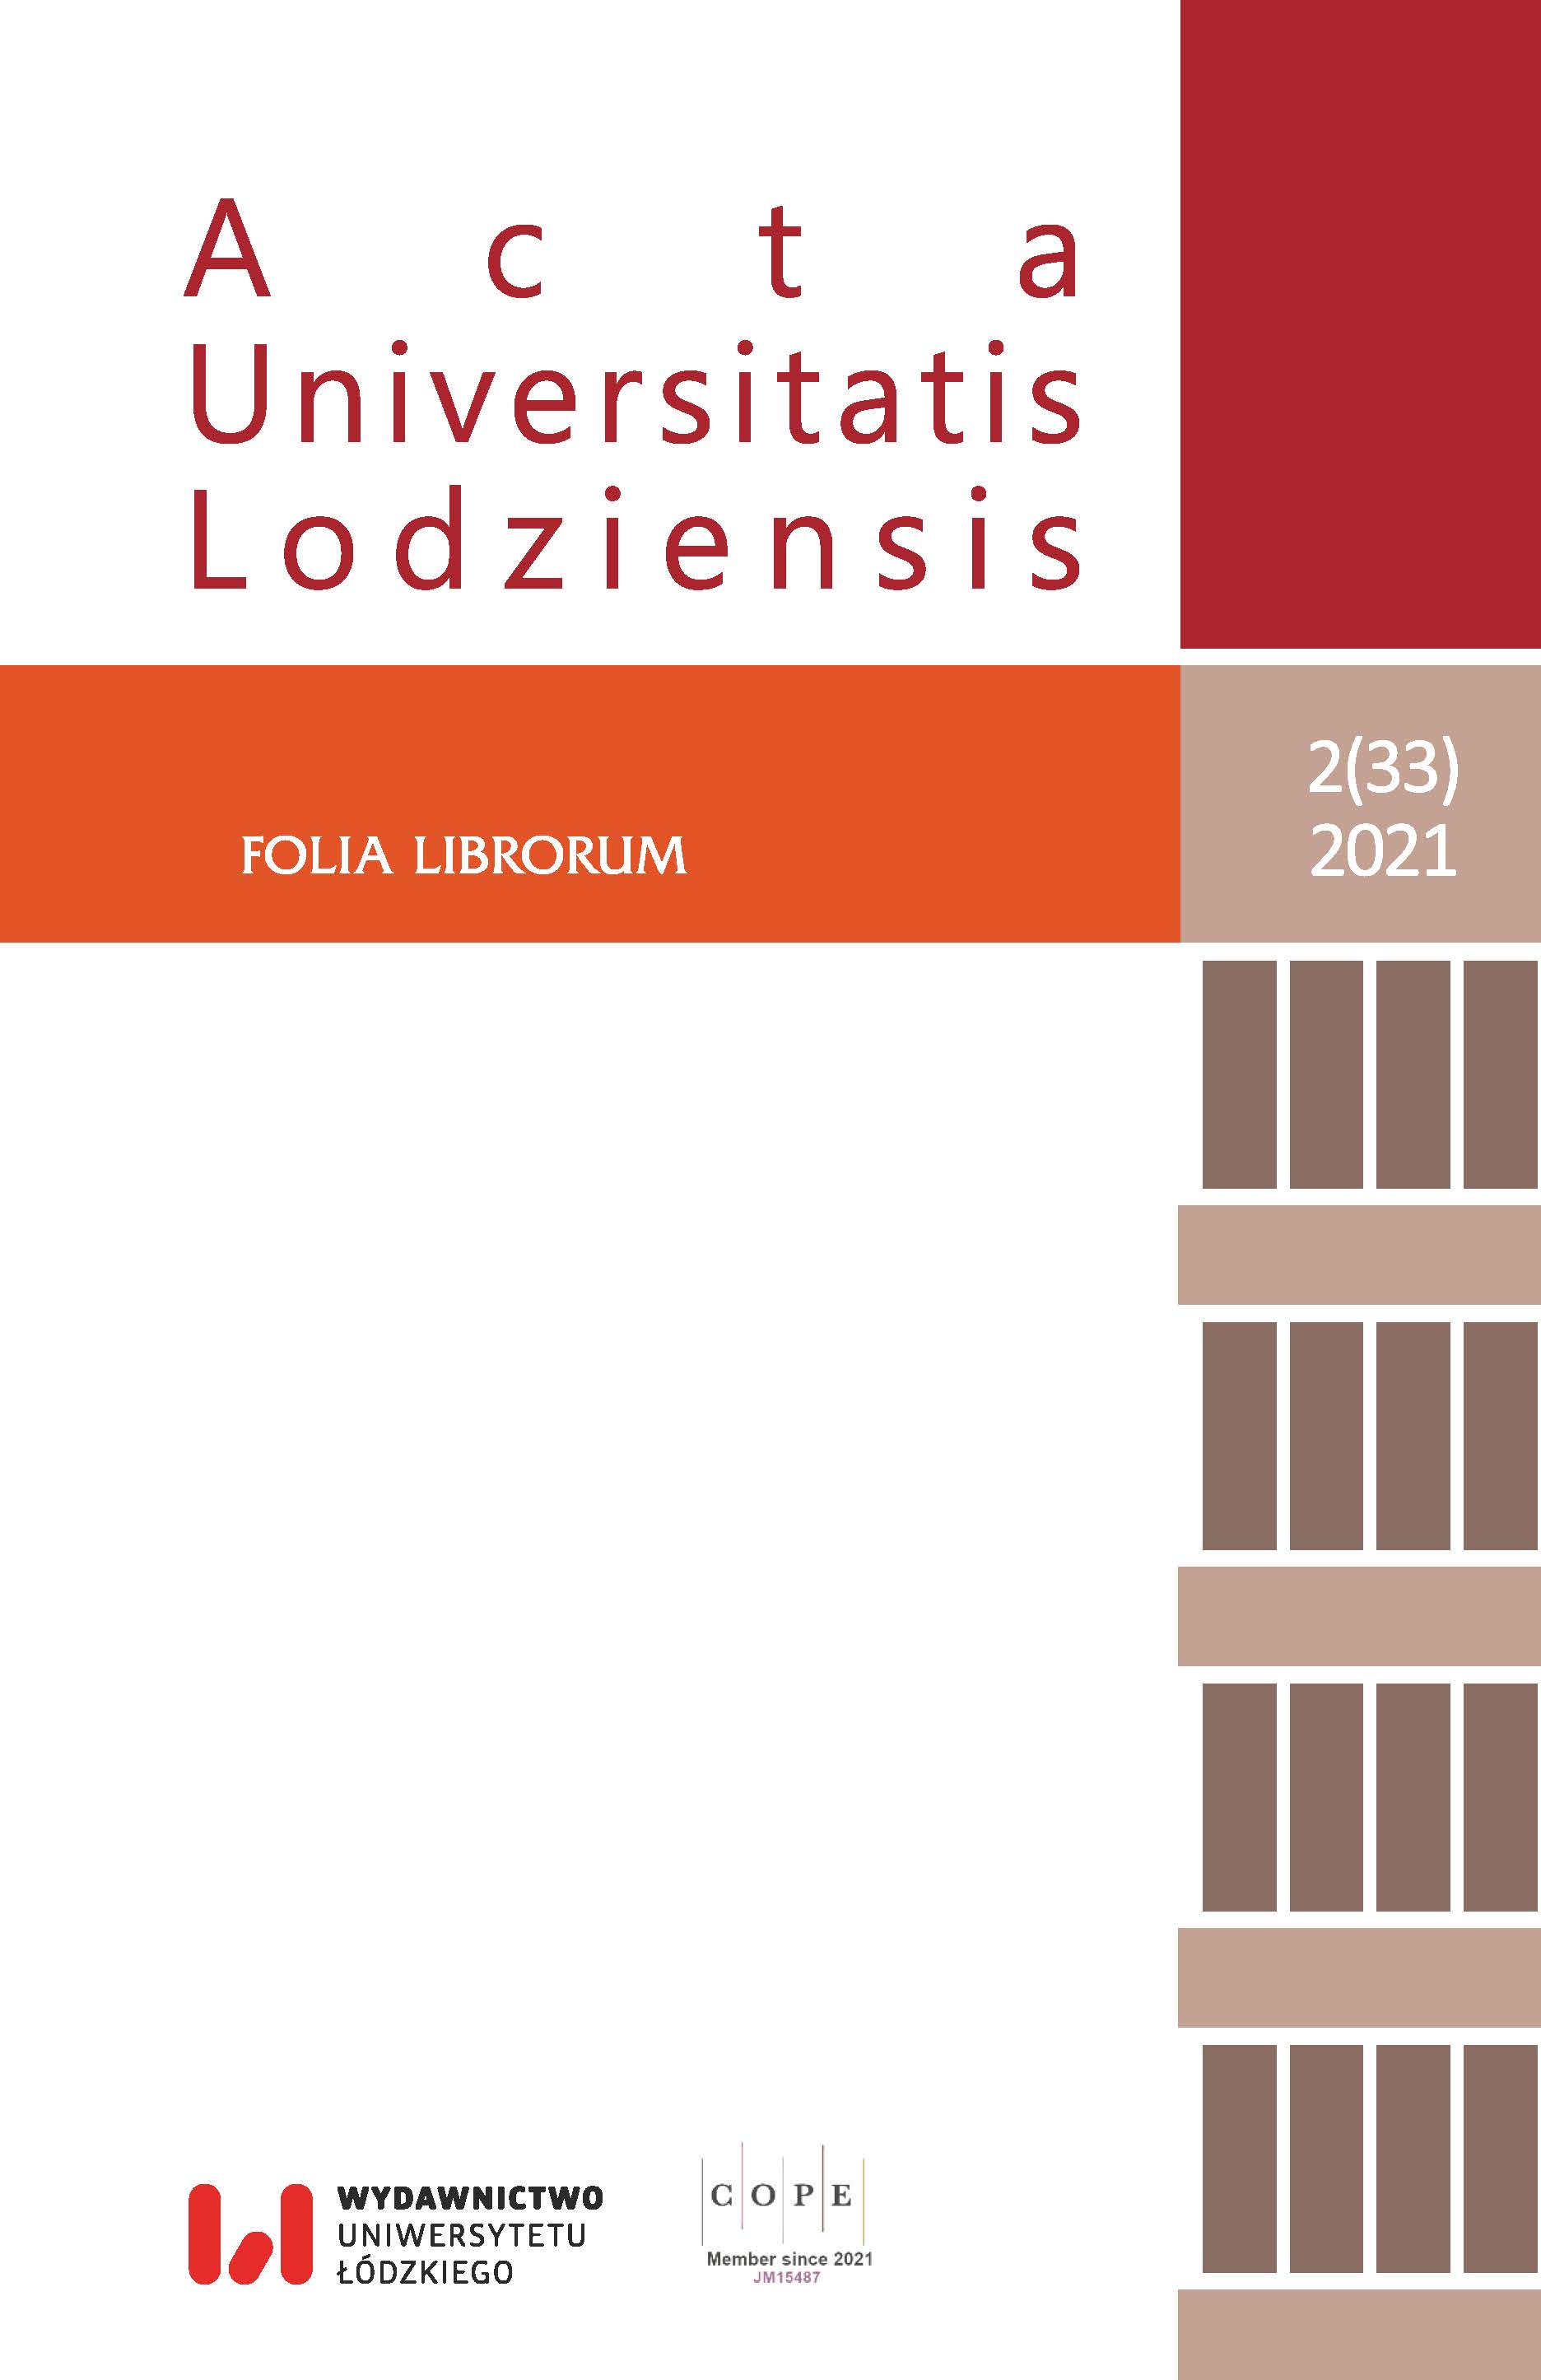 The University of Lodz Library activities during the pandemic (March 2020 – June 2021) Cover Image